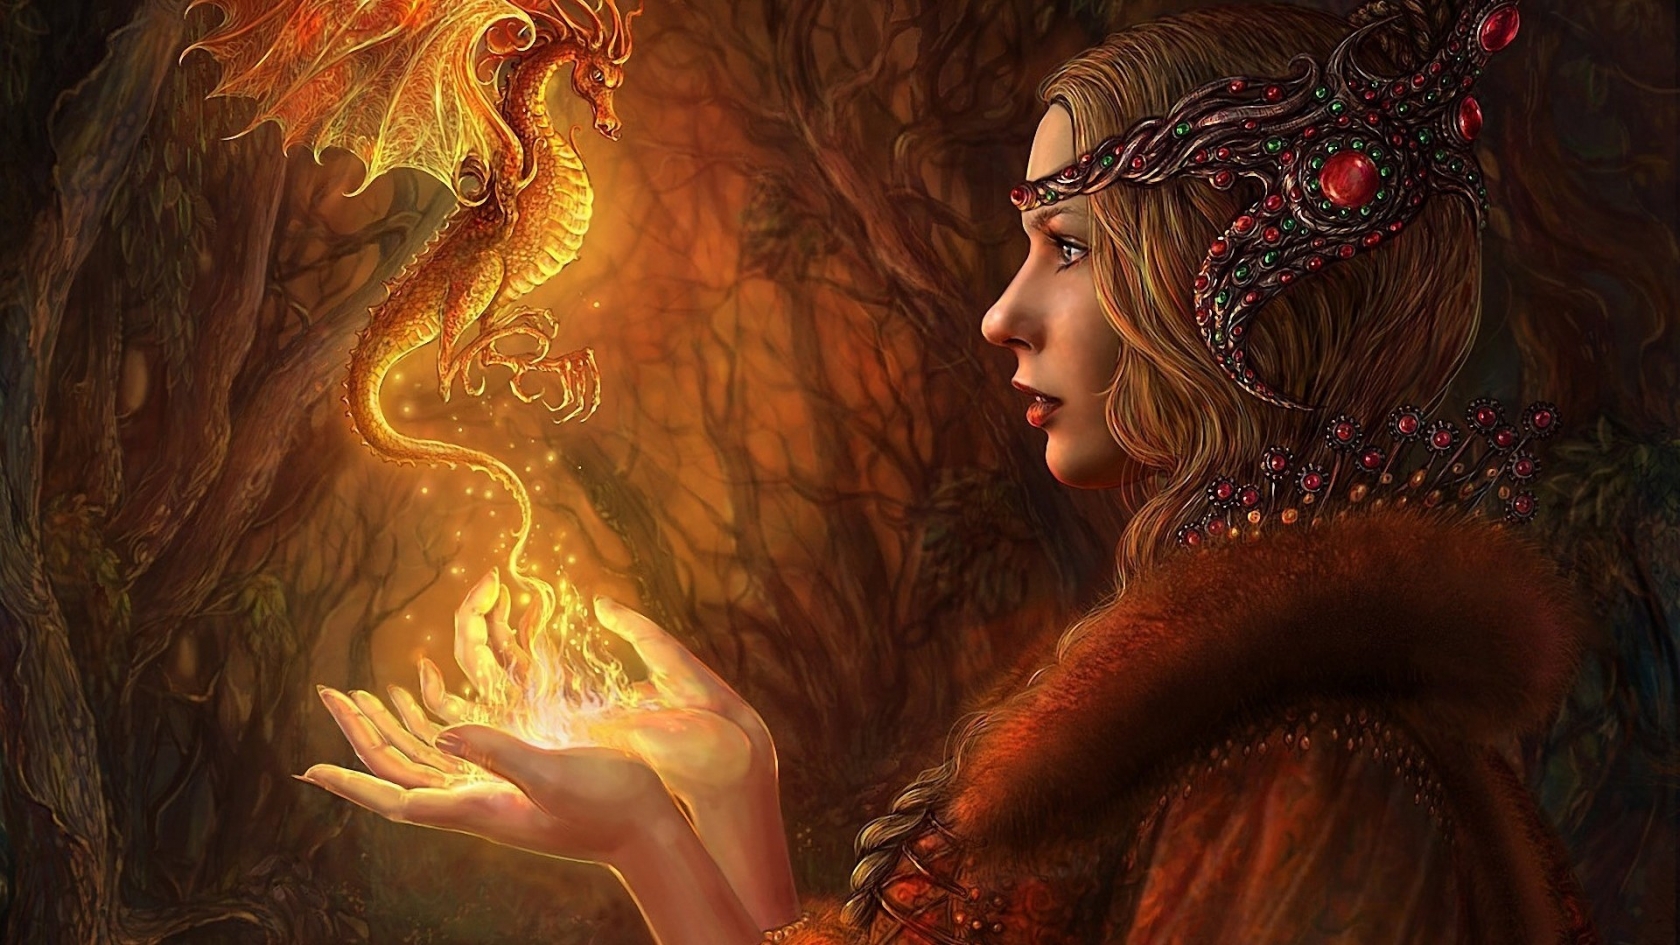 The Girl with Dragon for 1680 x 945 HDTV resolution